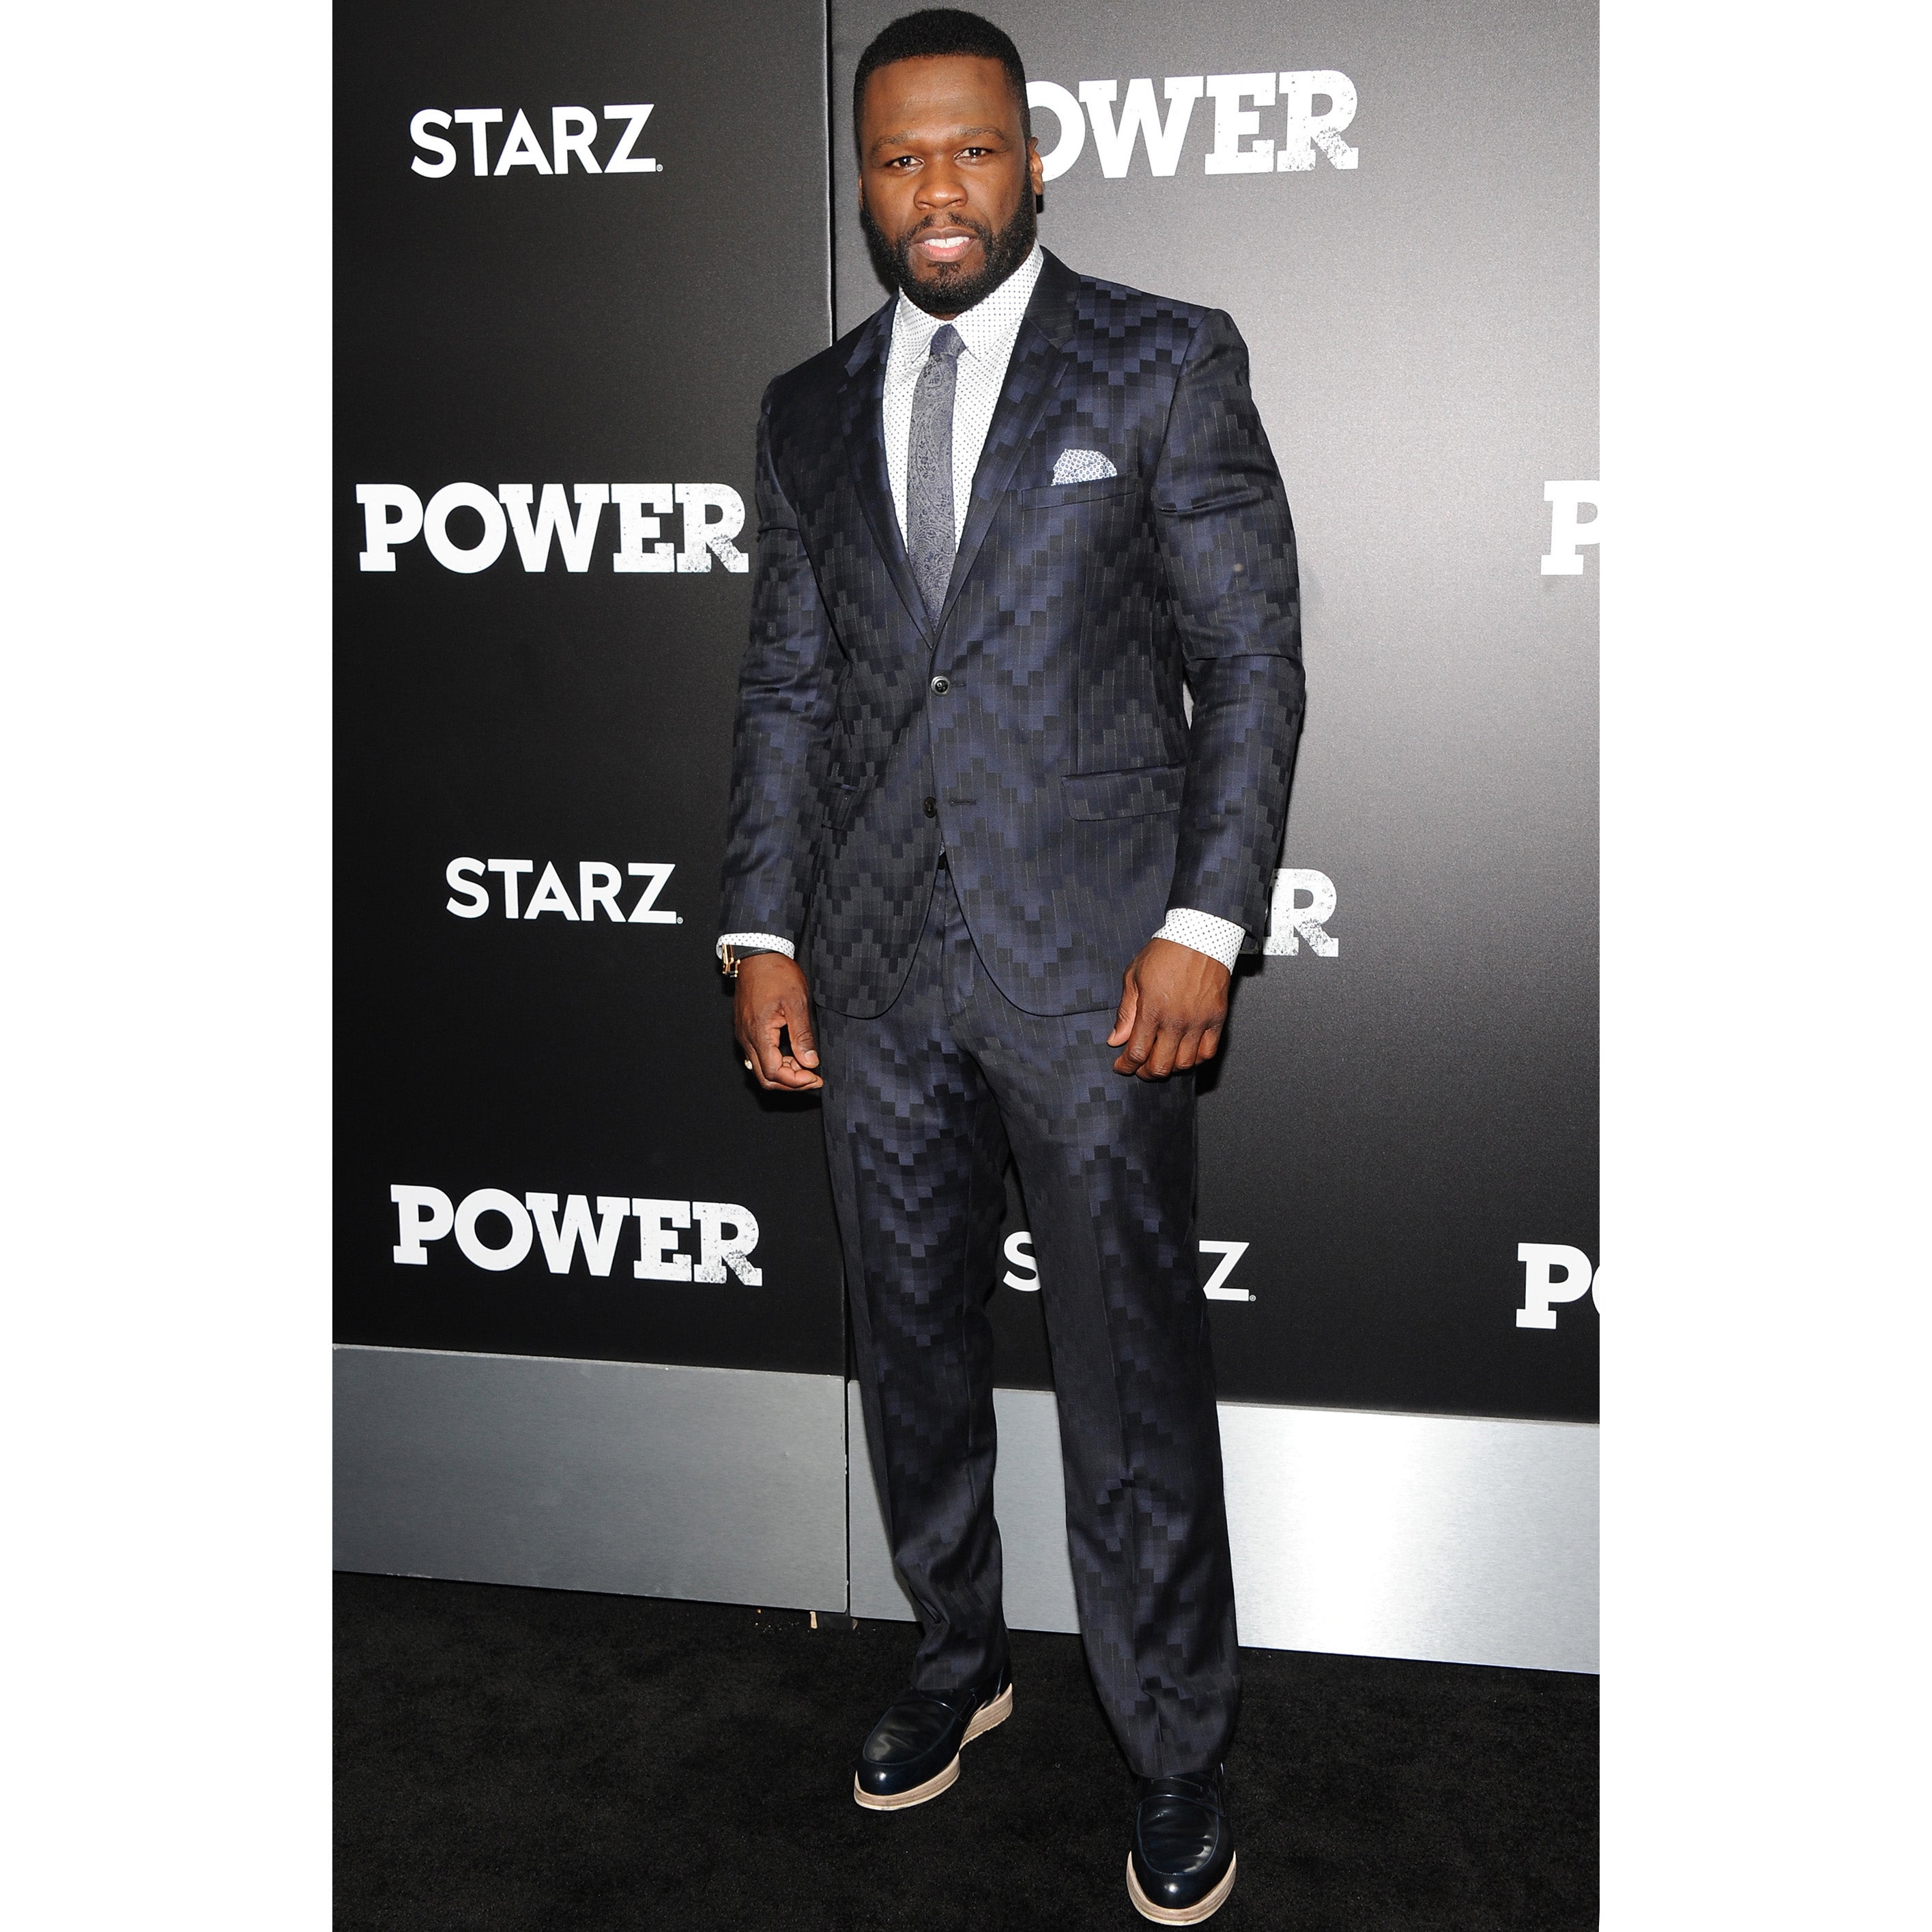 50 Cent Reveals His Aunt Was 'Traumatized' By His Full-Frontal Nude Scene on 'Power'
